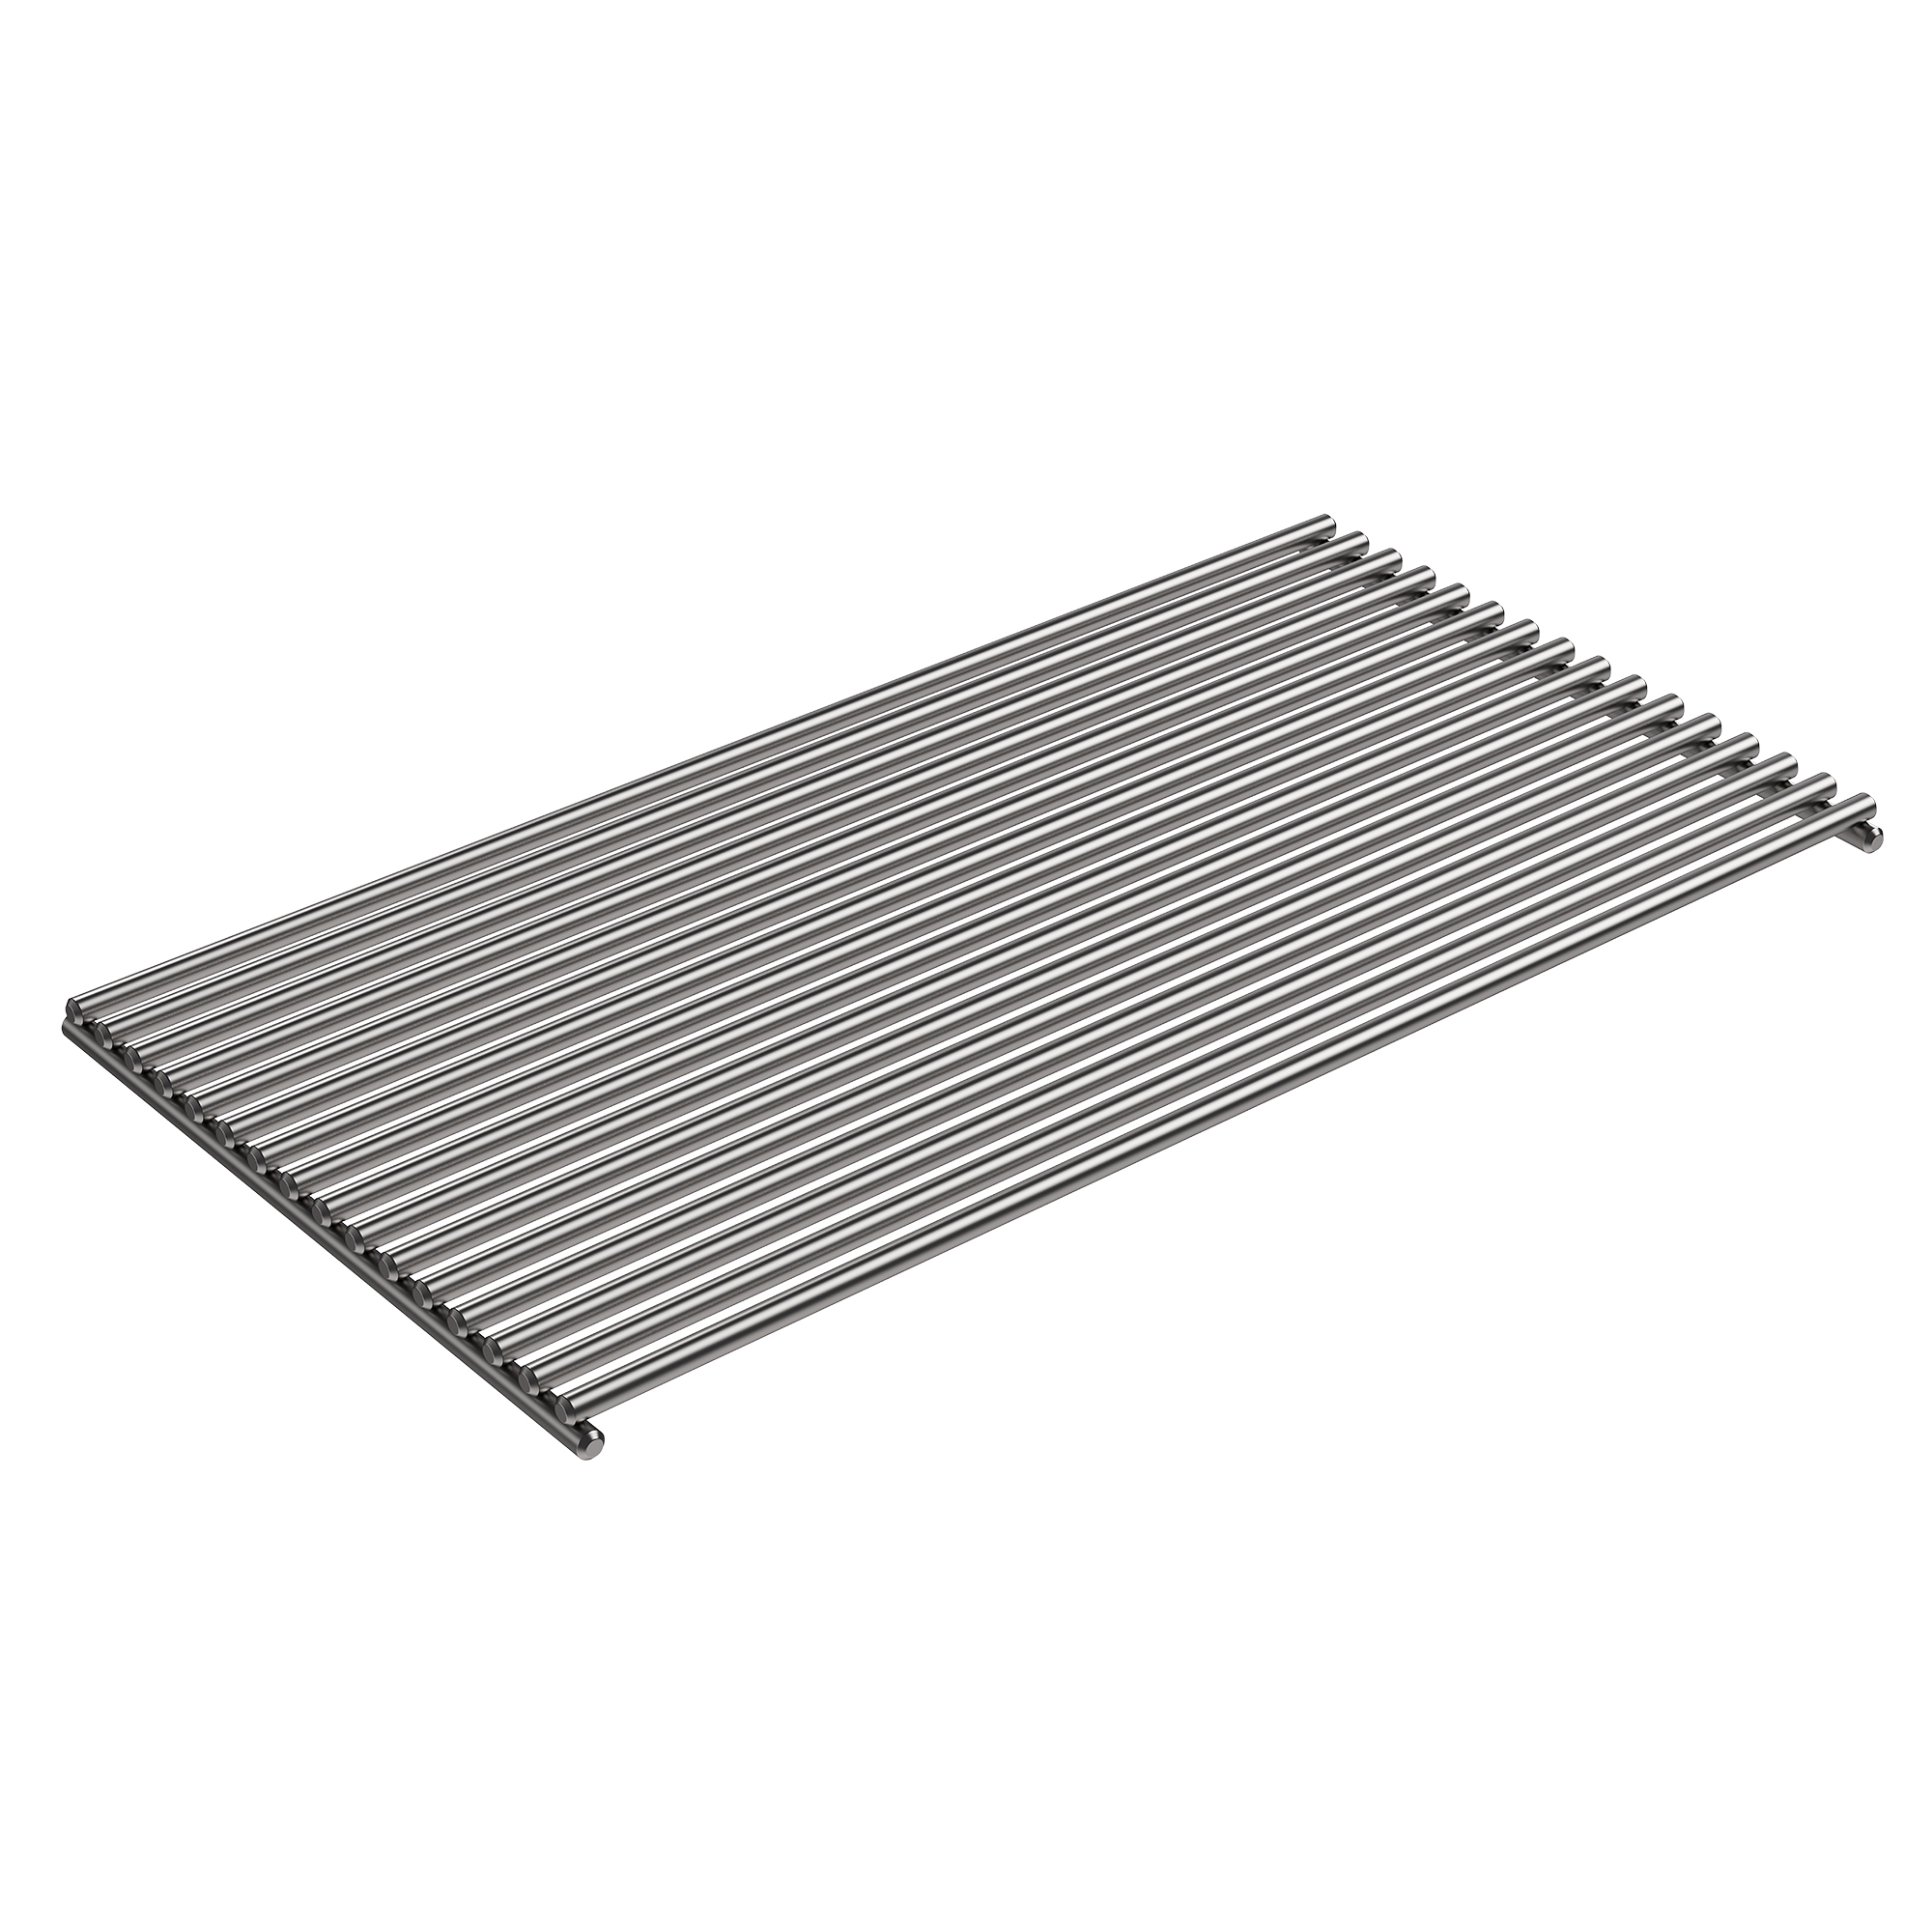 Stainless steel Grill grate Videro 24 x 45 cm (G2,G3,G4,G6 from Model year 2021)